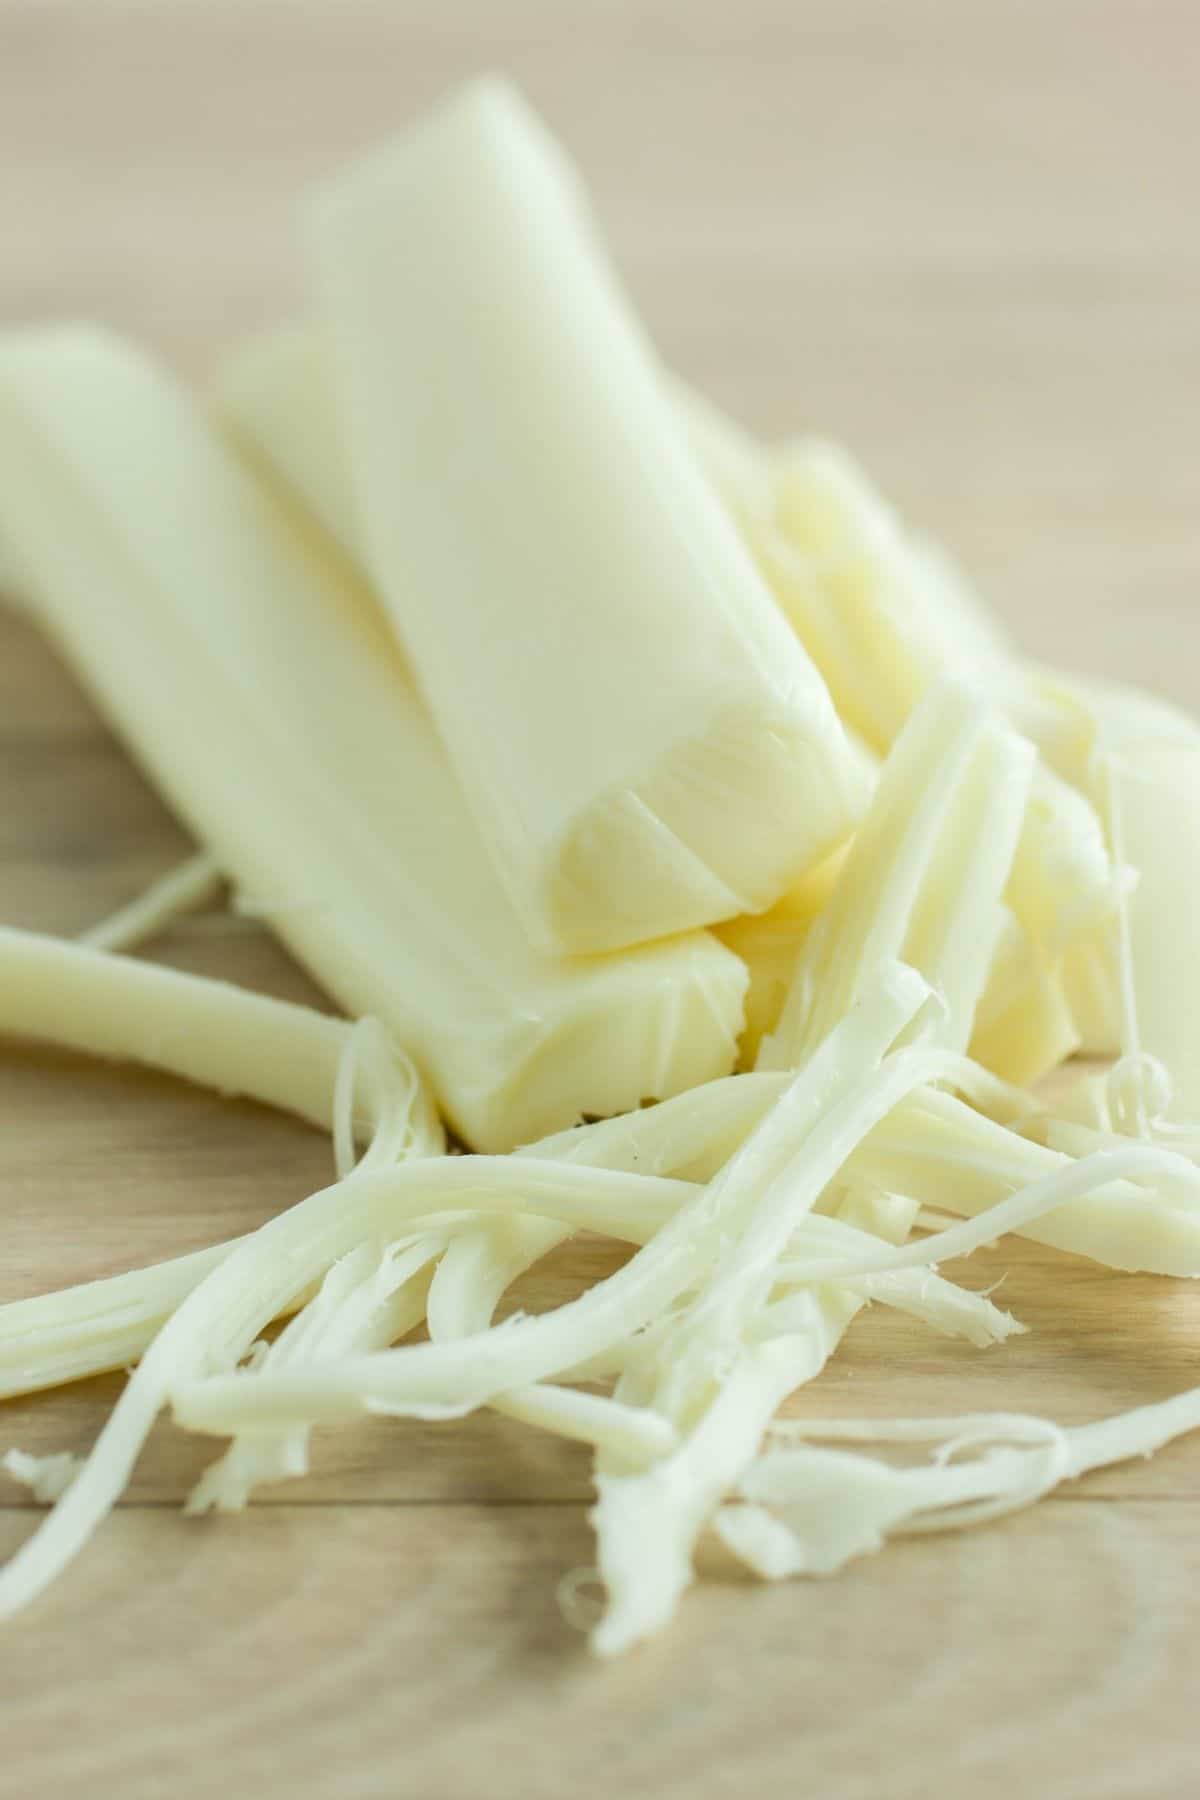 Celery and String cheese